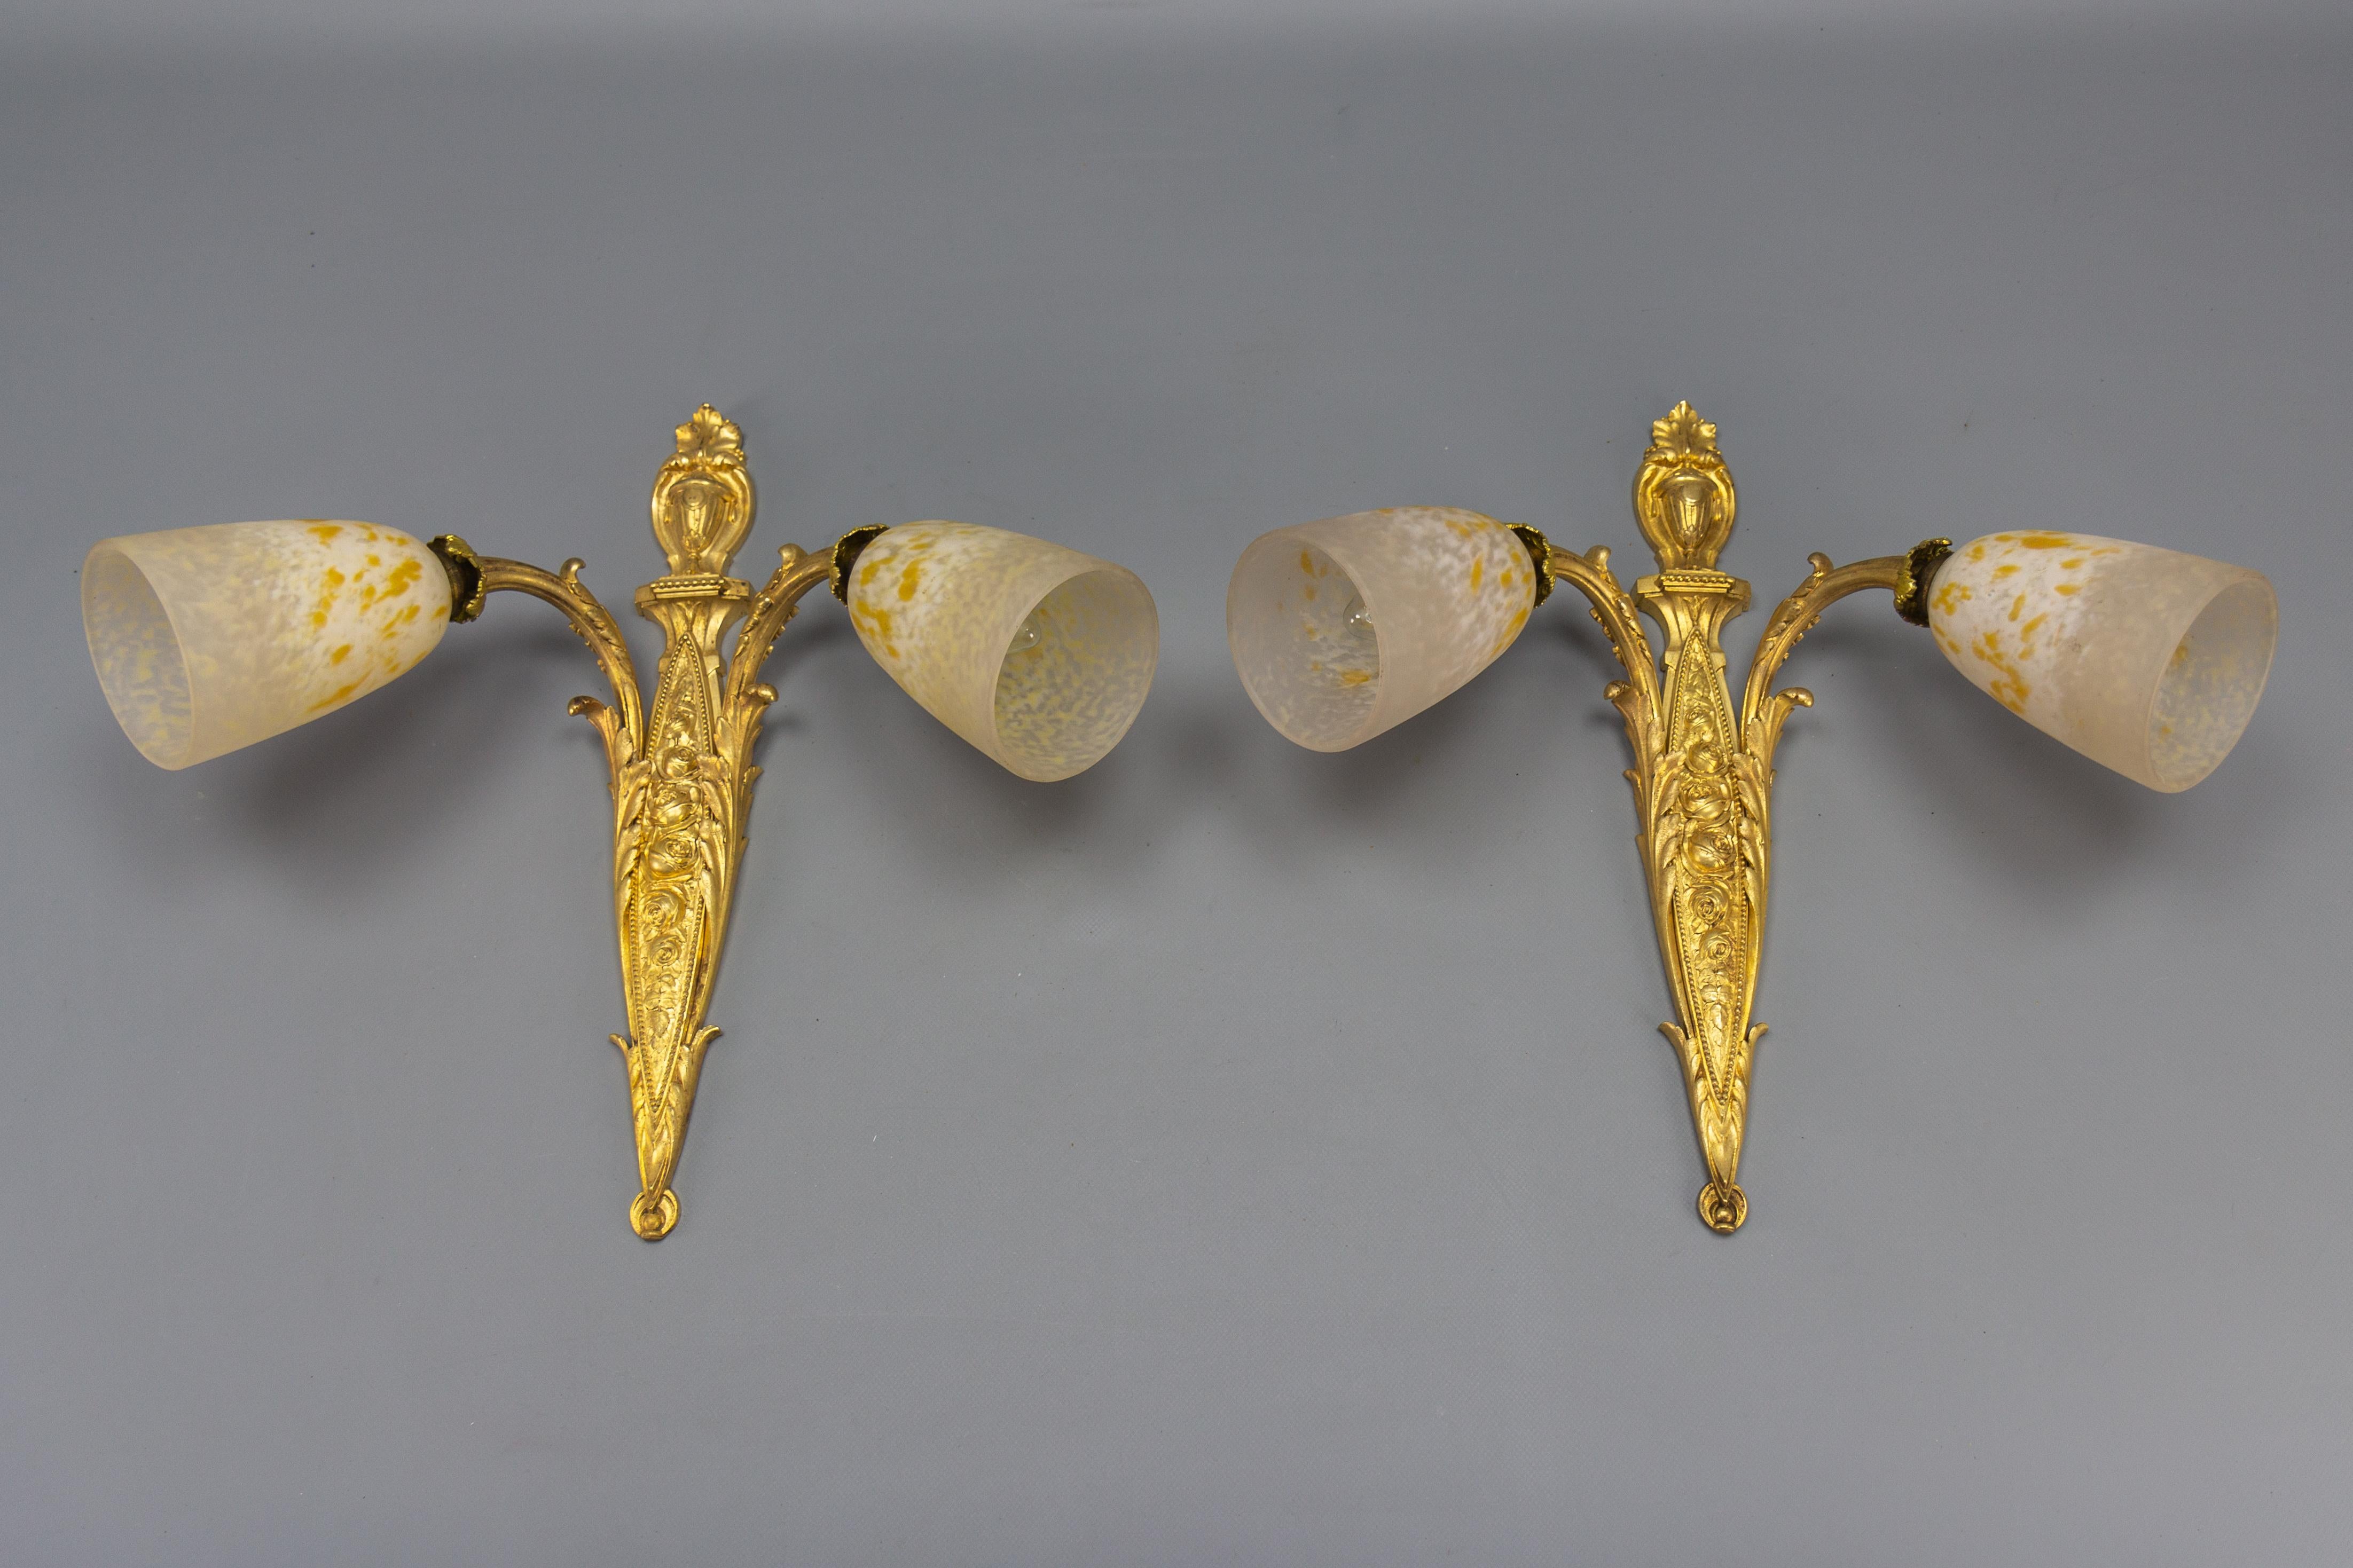 Pair of French Louis XV style bronze and white and yellow glass twin arm sconces from ca. 1910.
These impressive Louis XVI-style sconces feature bronze arms and a backplate of characteristic Louis XVI or Neoclassical-style design, richly decorated